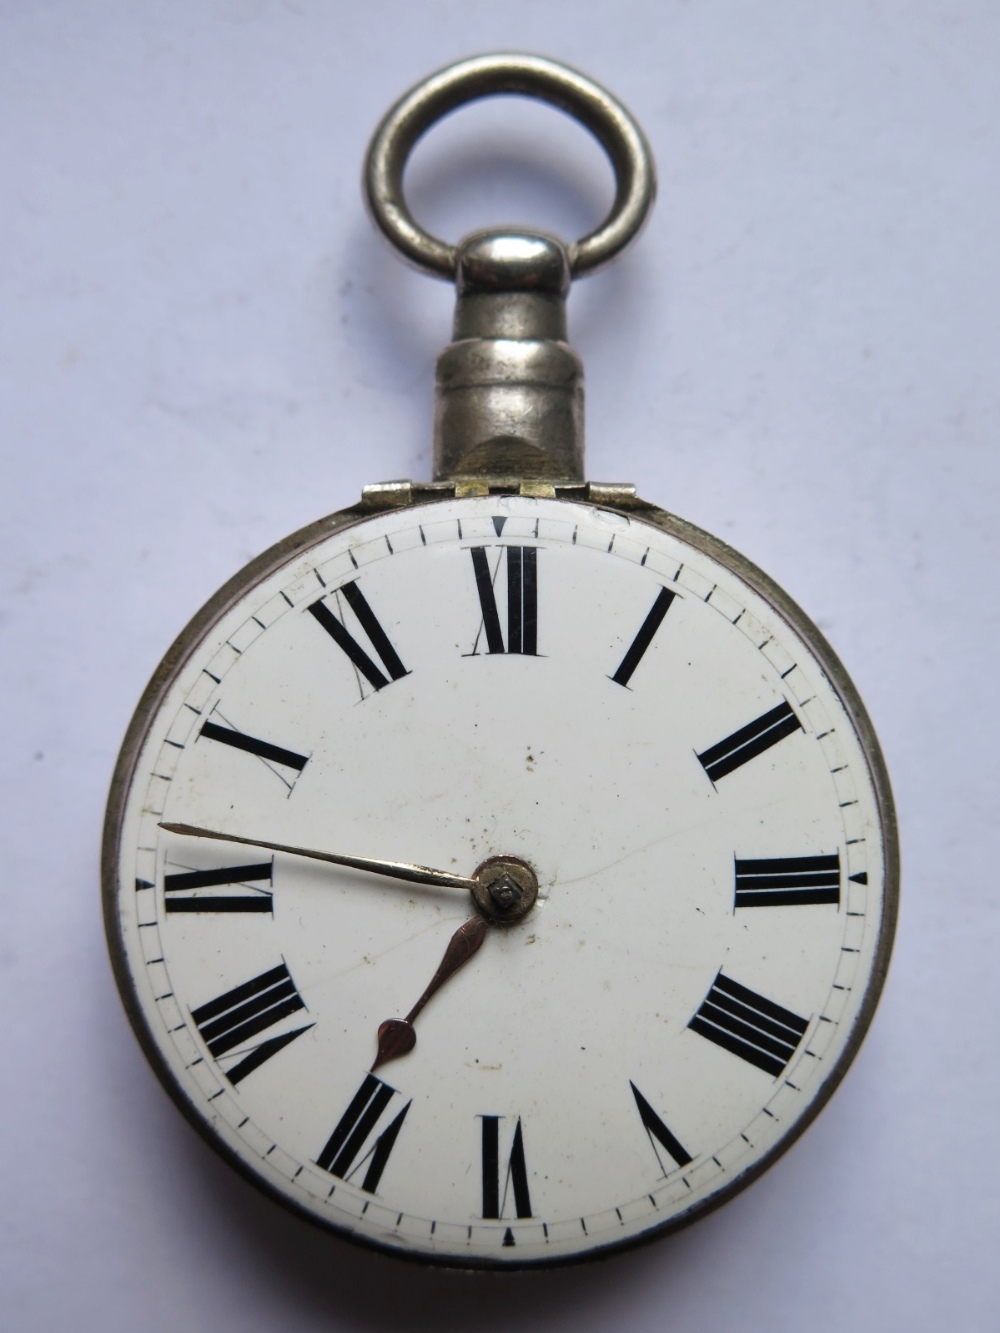 A George III Silver Pair Cased Pocket watch, the chain driven fusee movement signed Thos. Mandle - Image 2 of 3